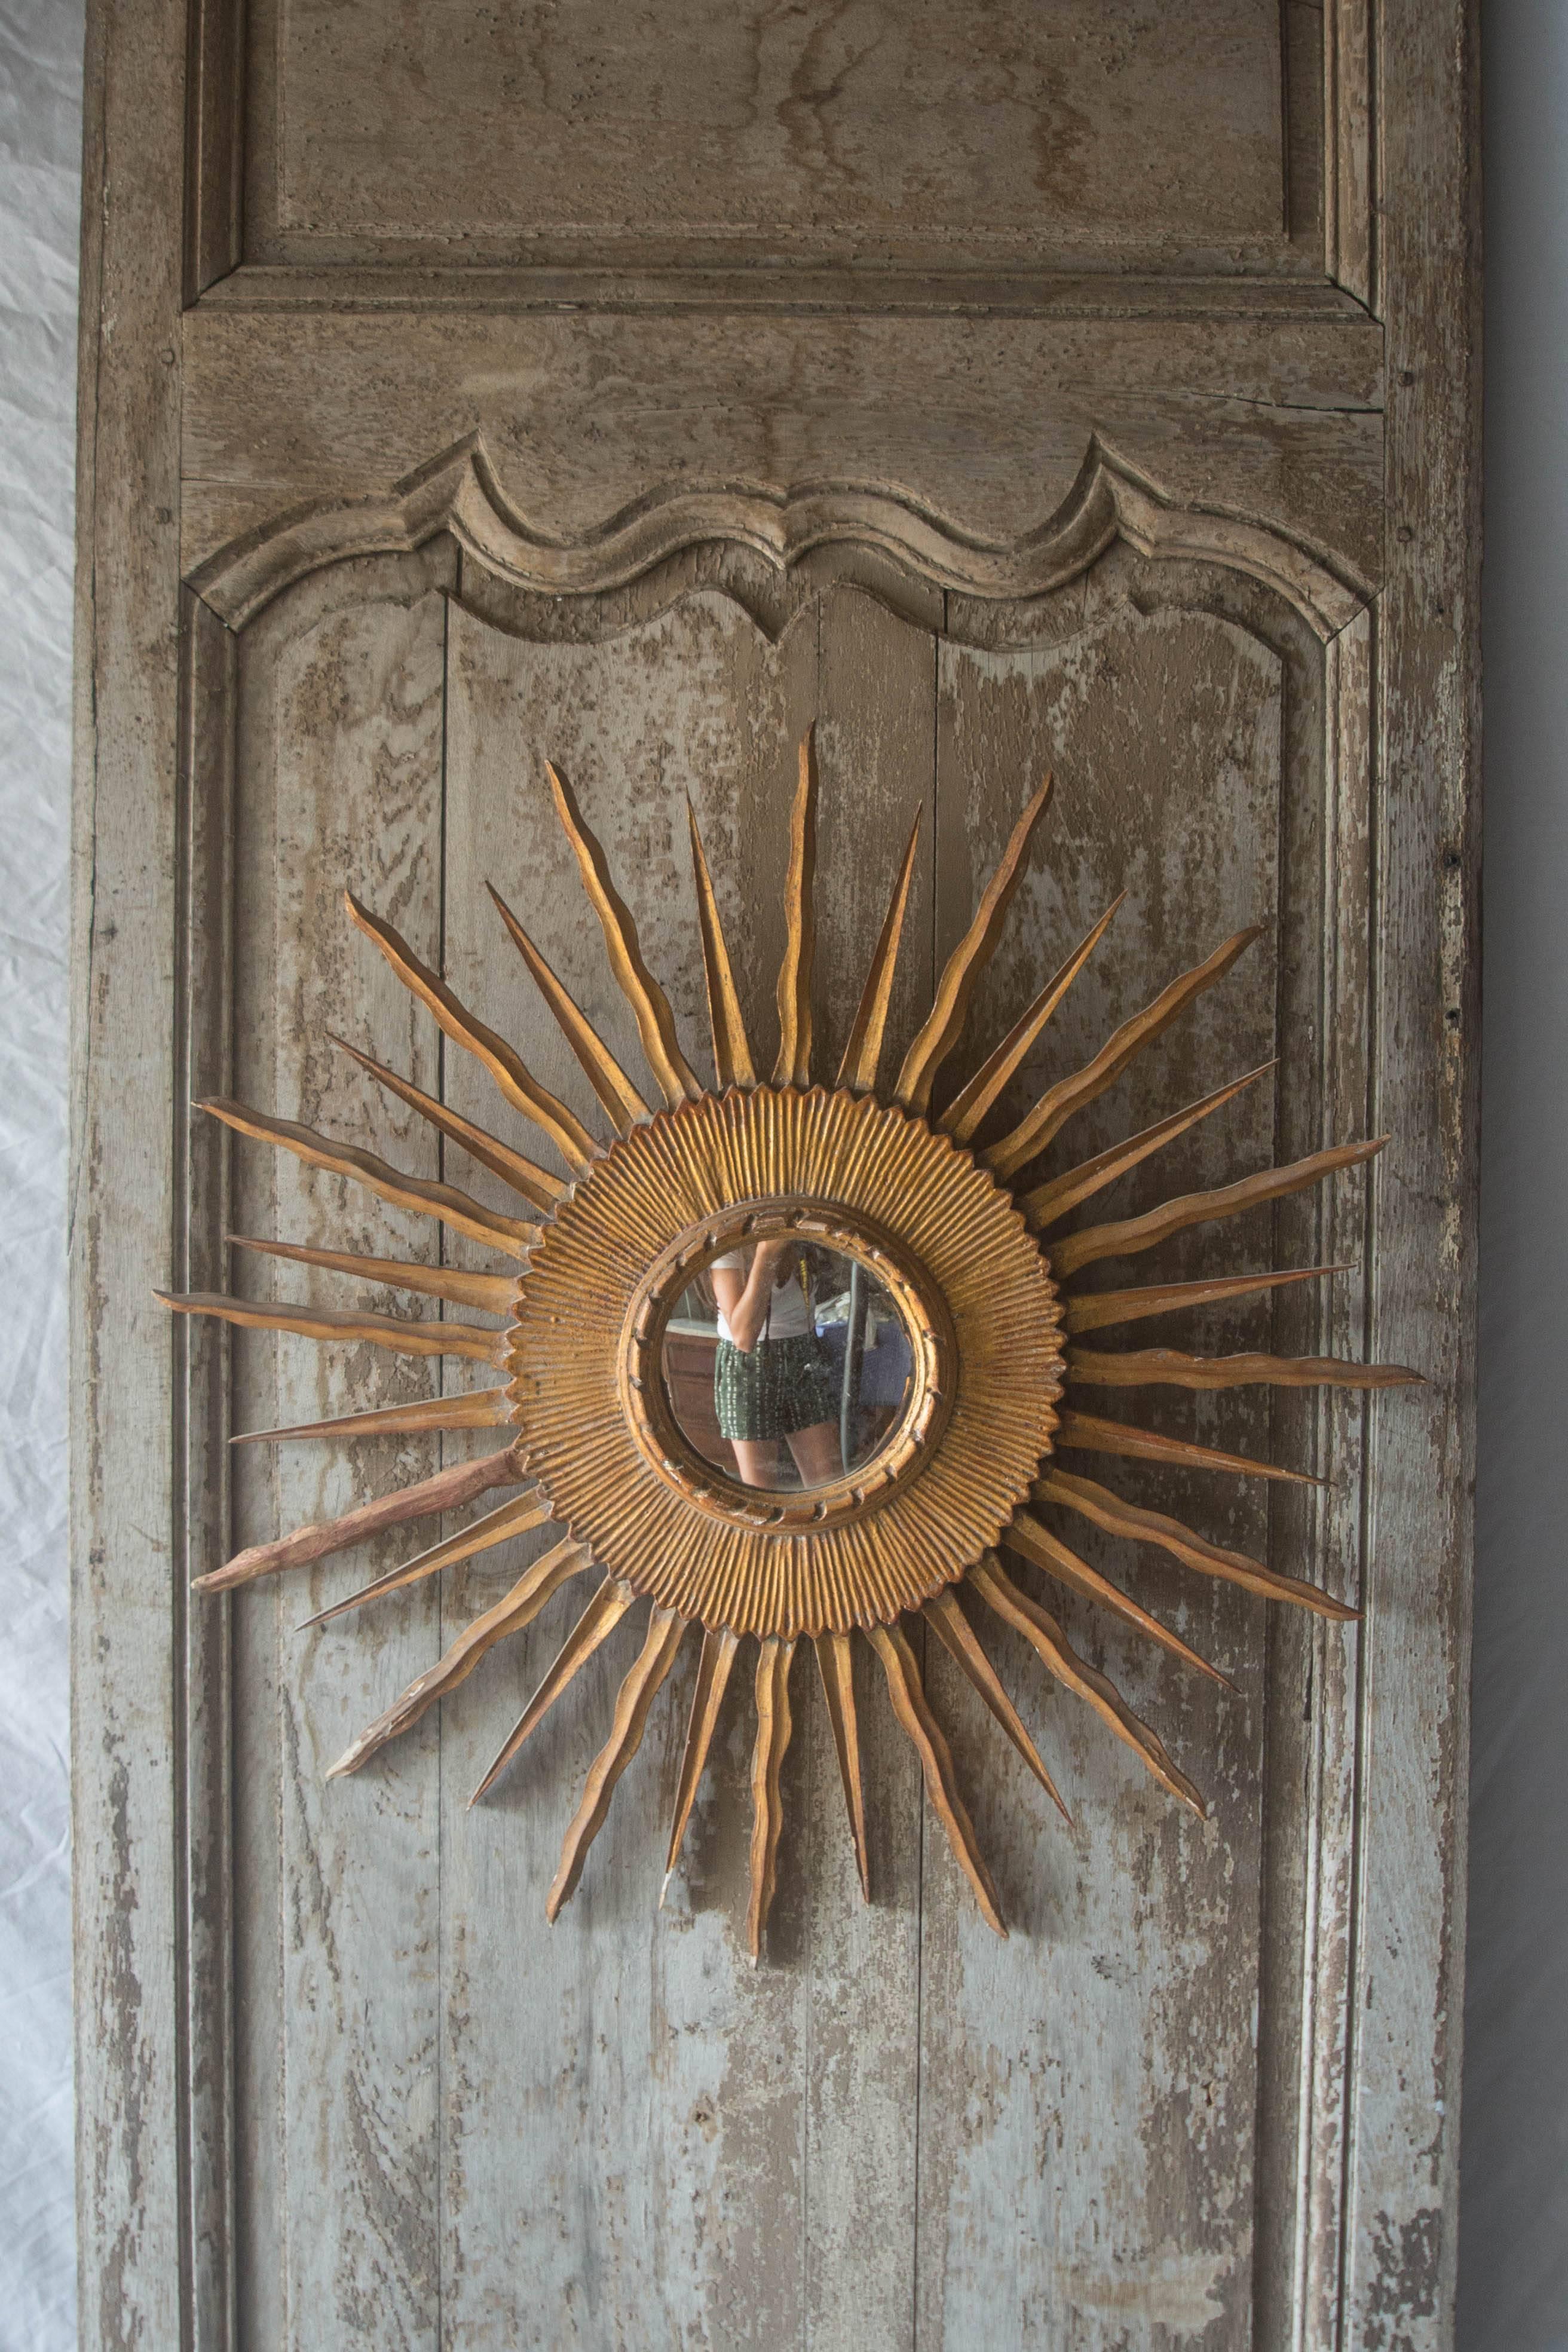 This 18th century French panel or door features an unusual raised panel with the 